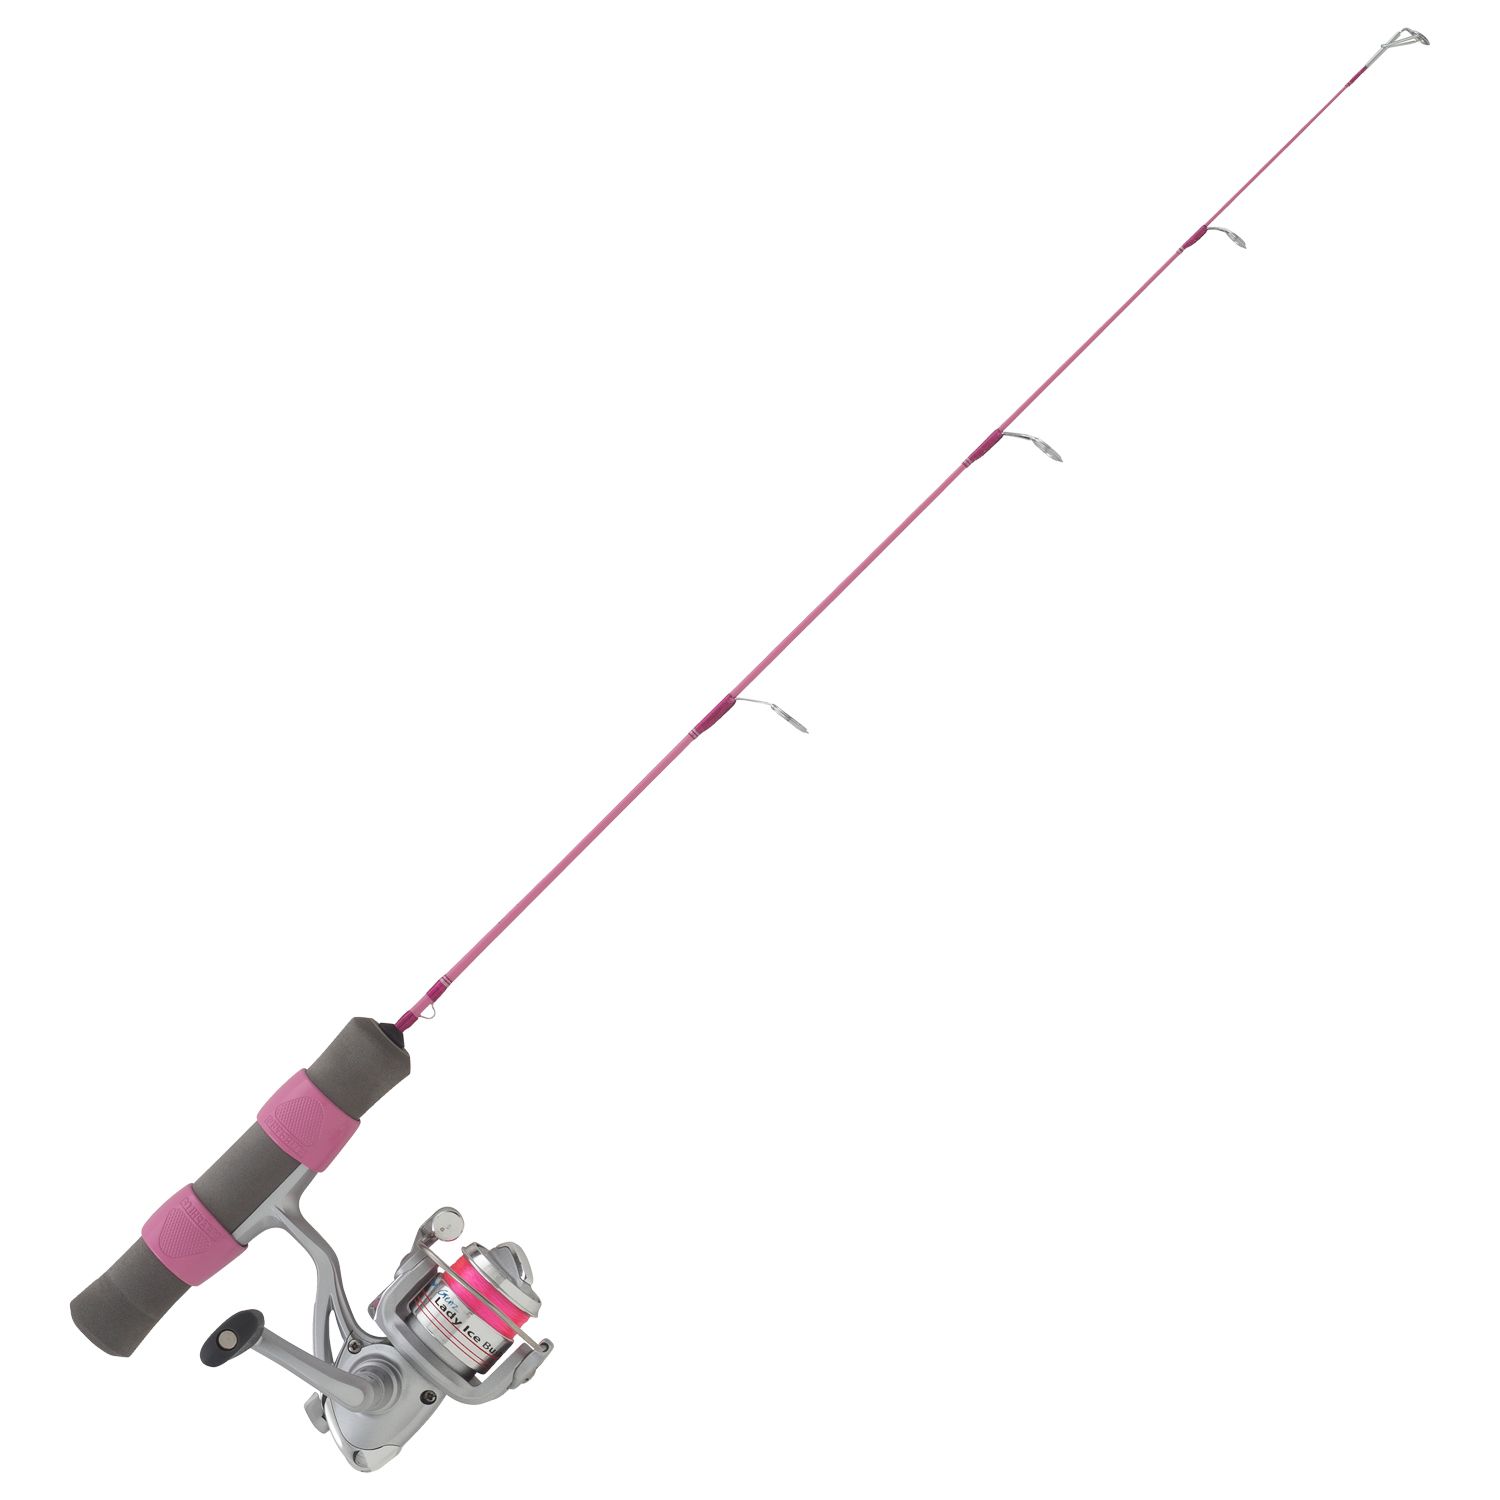 Dick's Sporting Goods Clam Dave Genz Lady Ice Buster Ice Fishing